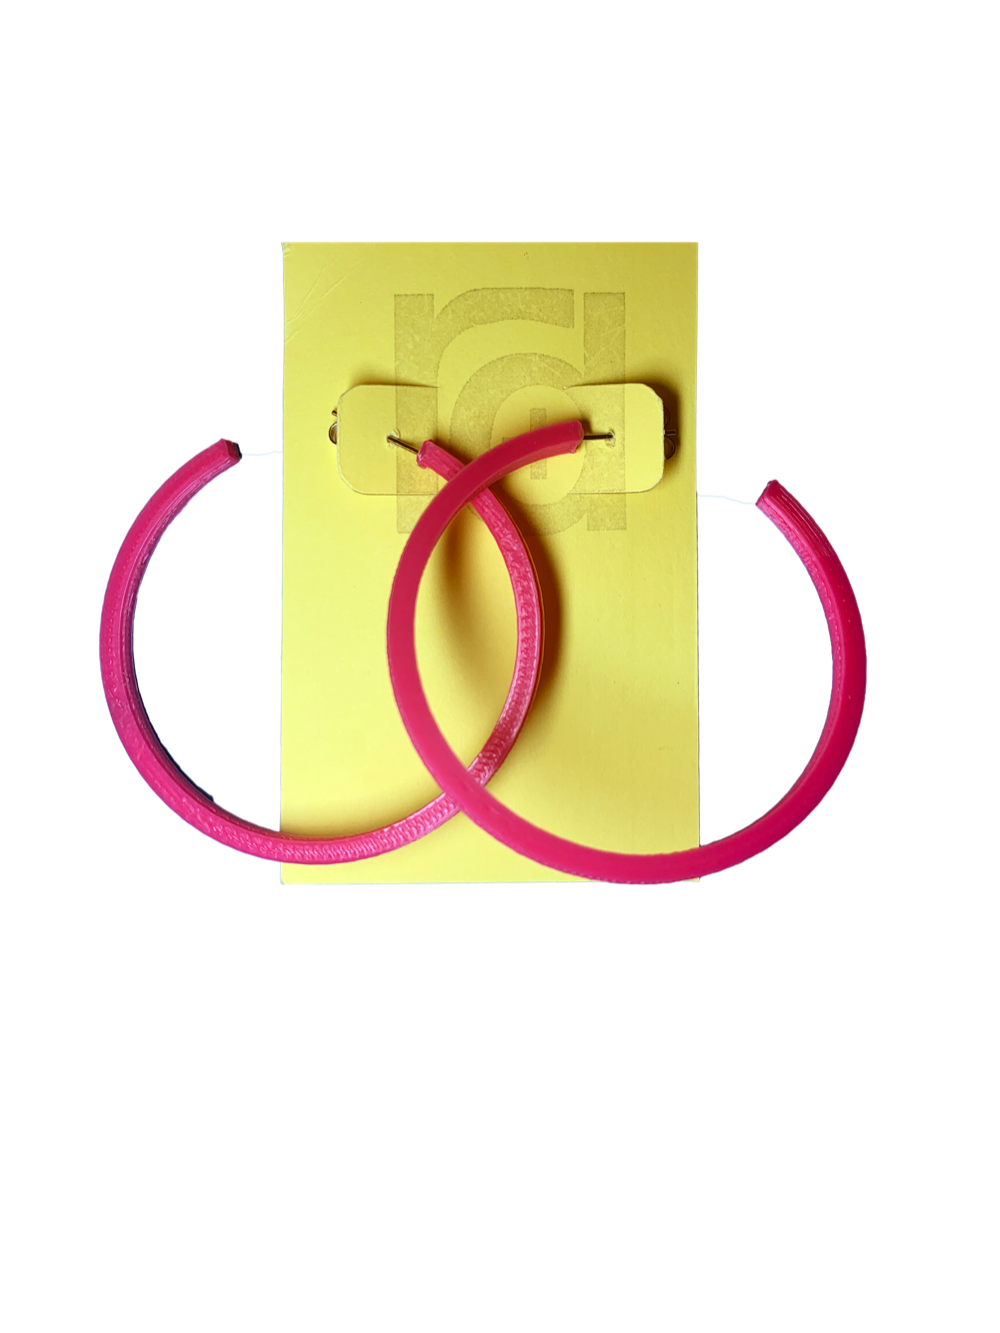 Shown on a yellow R+D card are two 3D printed hoop earrings. They are large two inch hoops in a bright hot pink  that are lightweight and plant based.